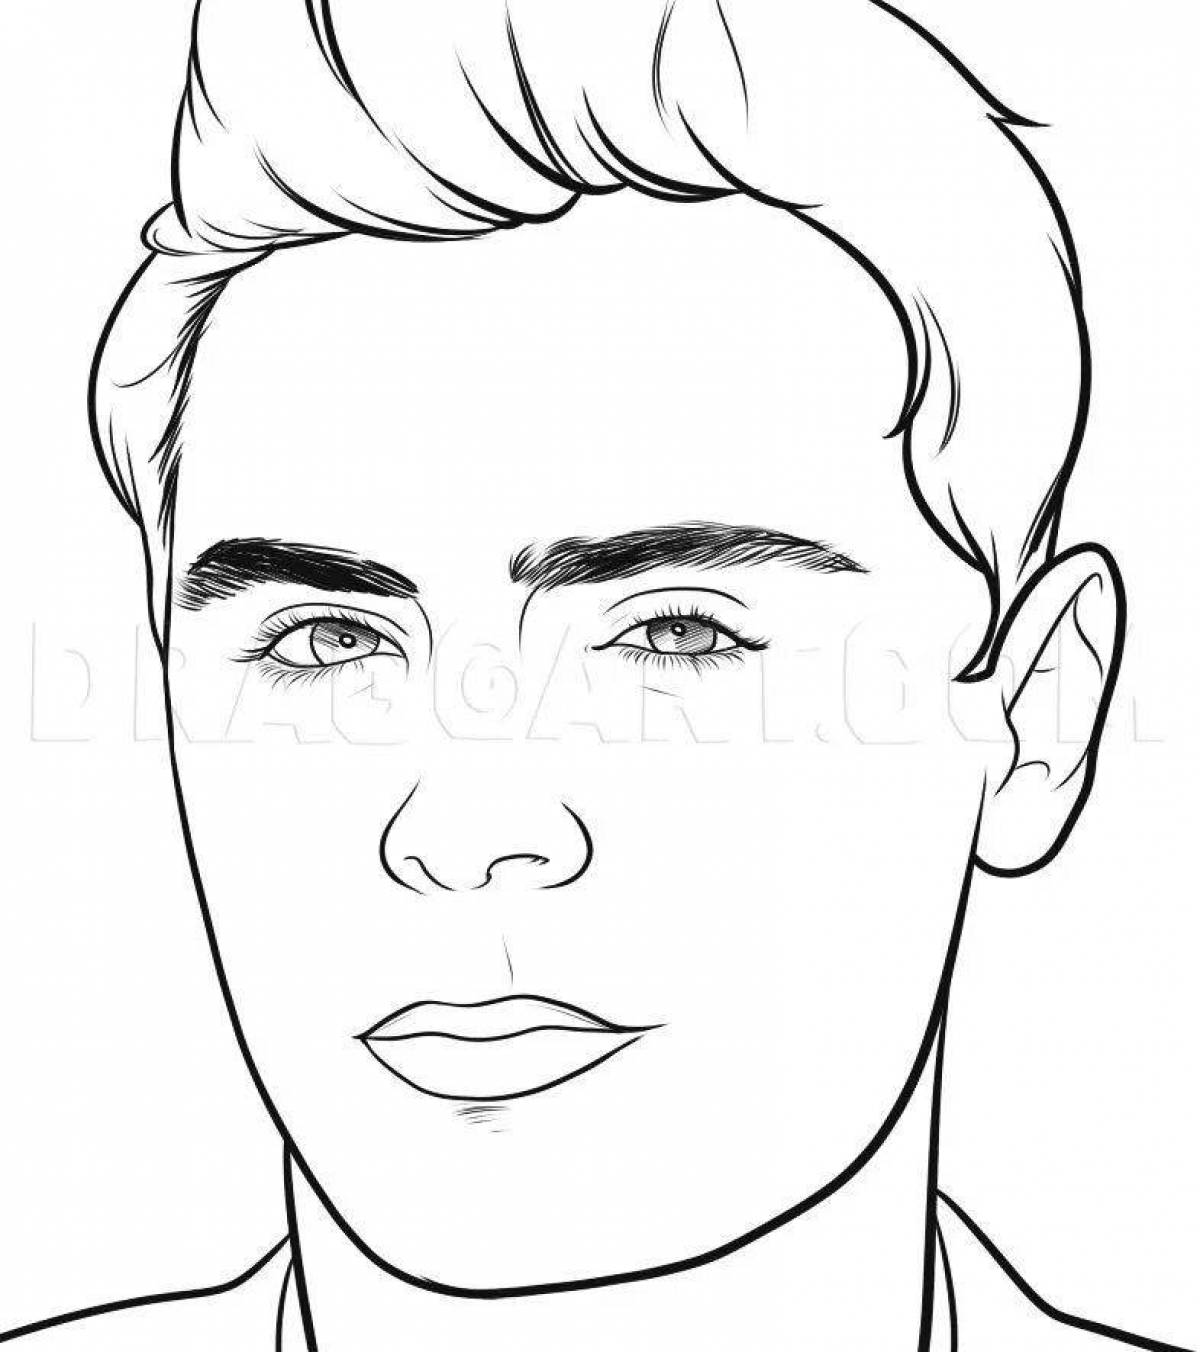 Coloring page of a balanced person's face